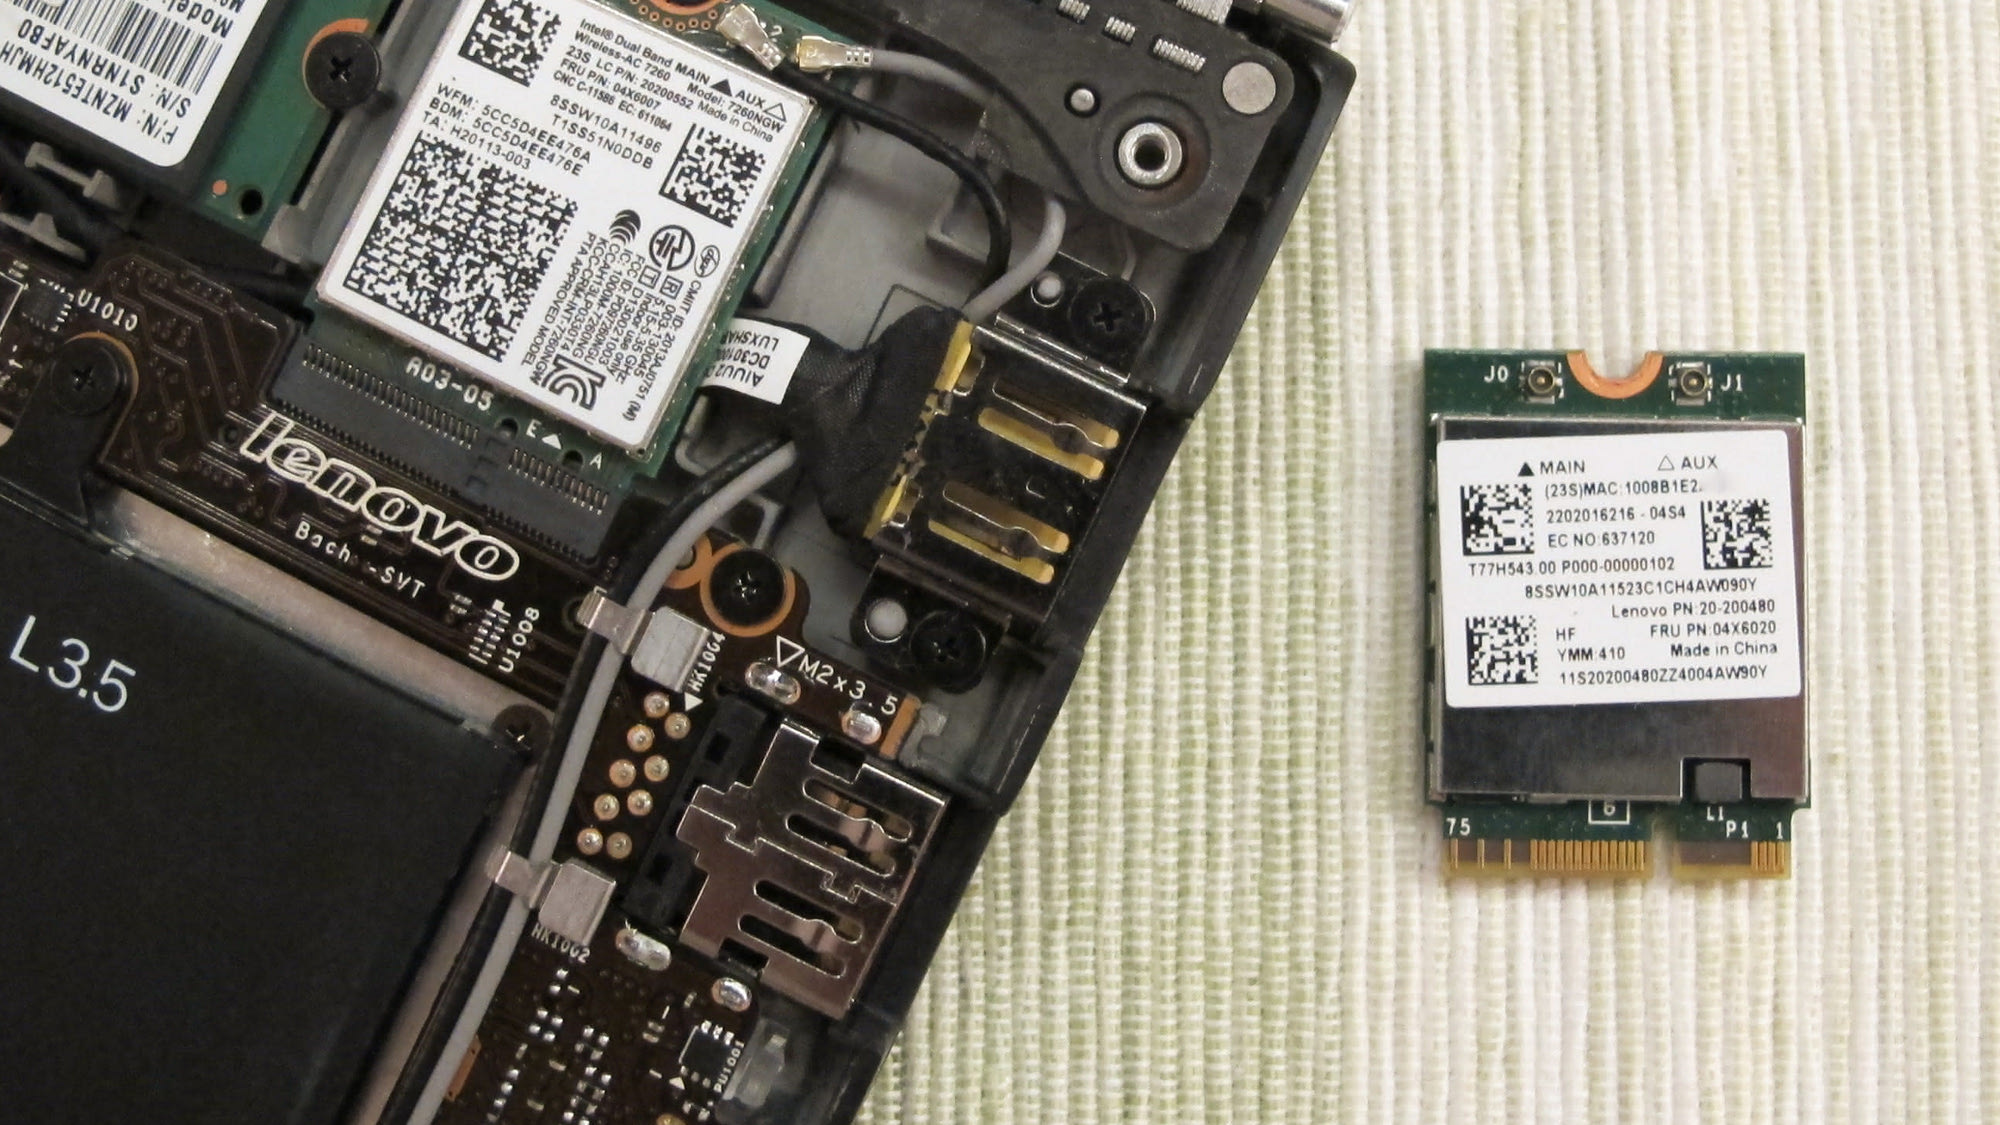 Replace the problematic Broadcom Wi-Fi module with an Intel model | Ctrl  blog